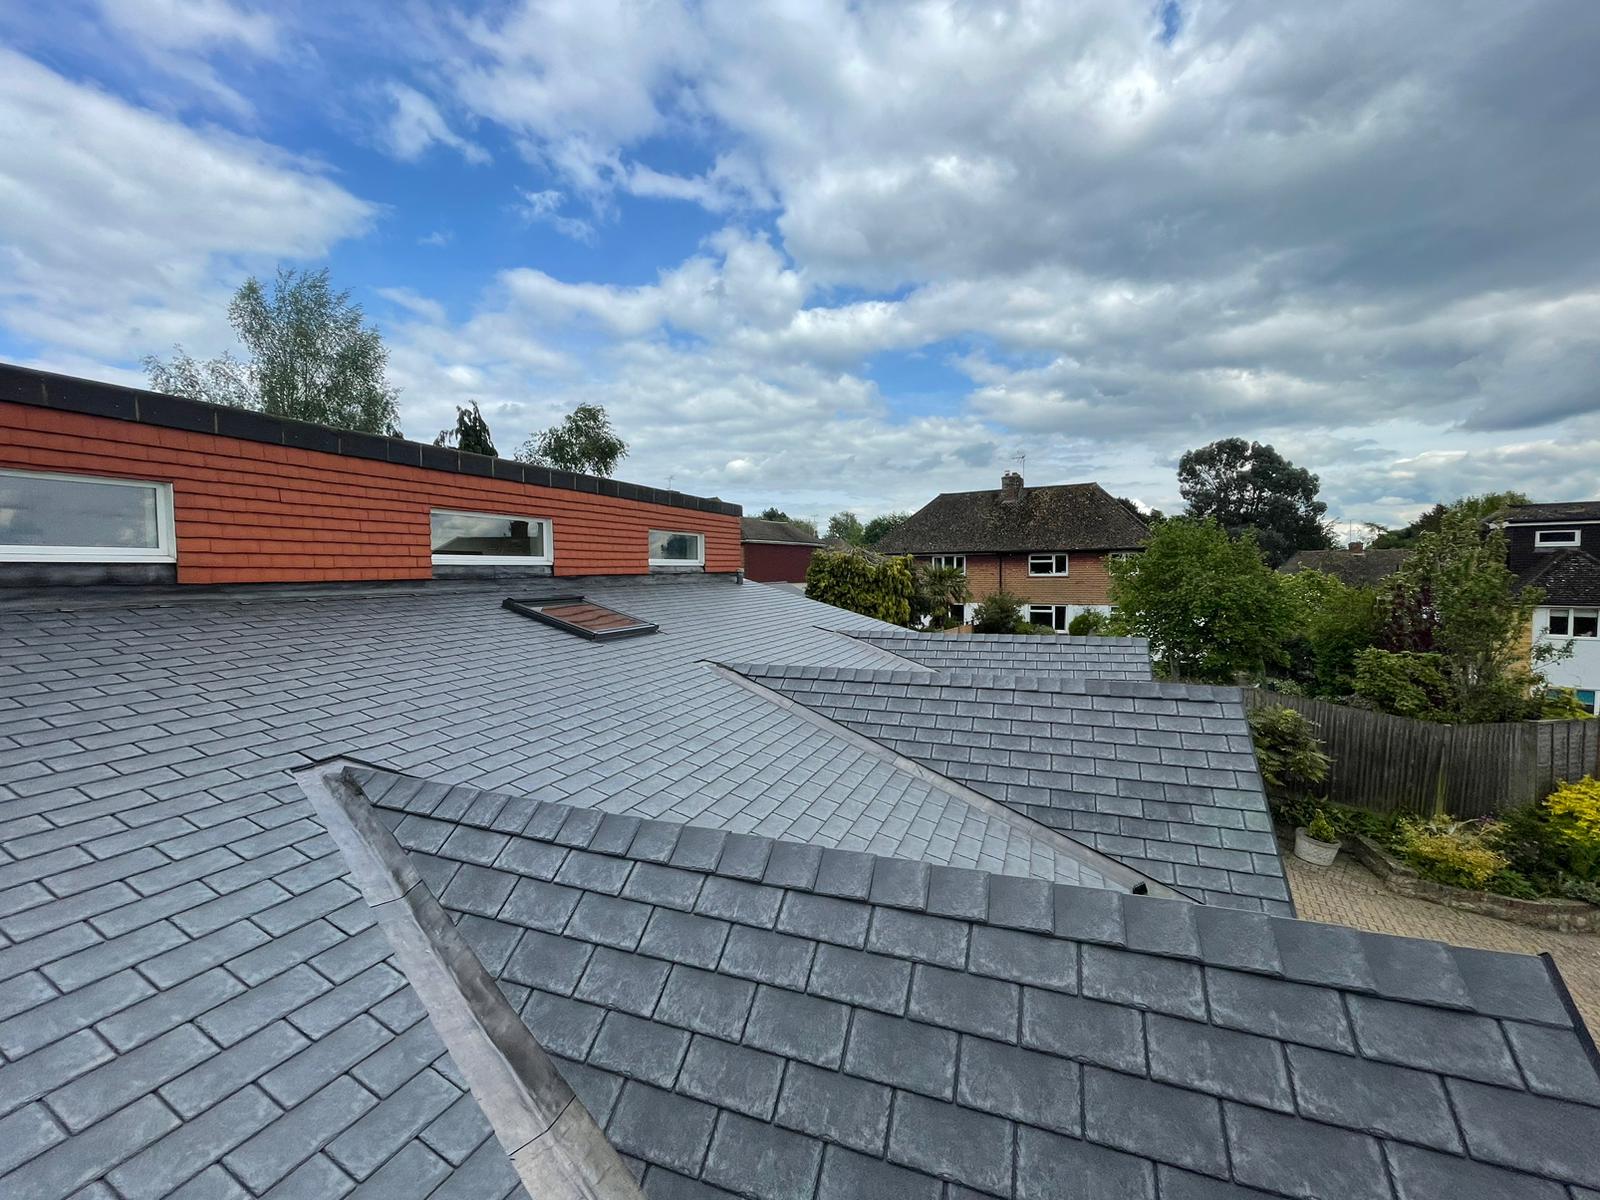 Low pitch roof replacement using TAPCO slates with lead valleys